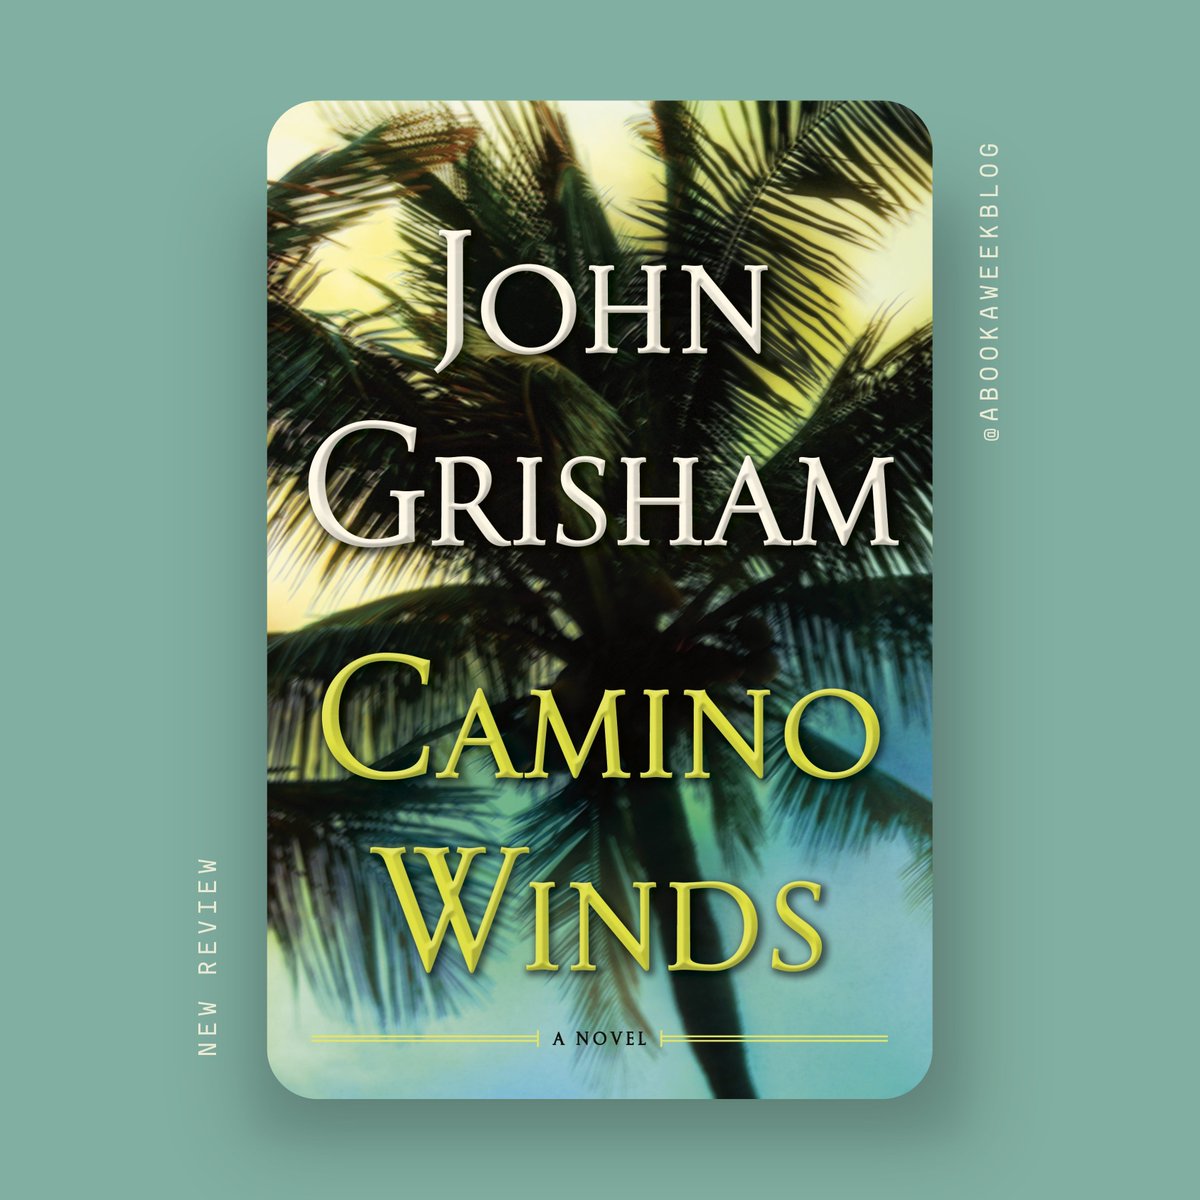 CAMINO WINDS by John Grisham offers a gripping murder mystery set in the aftermath of a devasting hurricane. REVIEW: e135-abookaweek.blogspot.com/2024/03/camino… @JohnGrisham @doubledaybooks